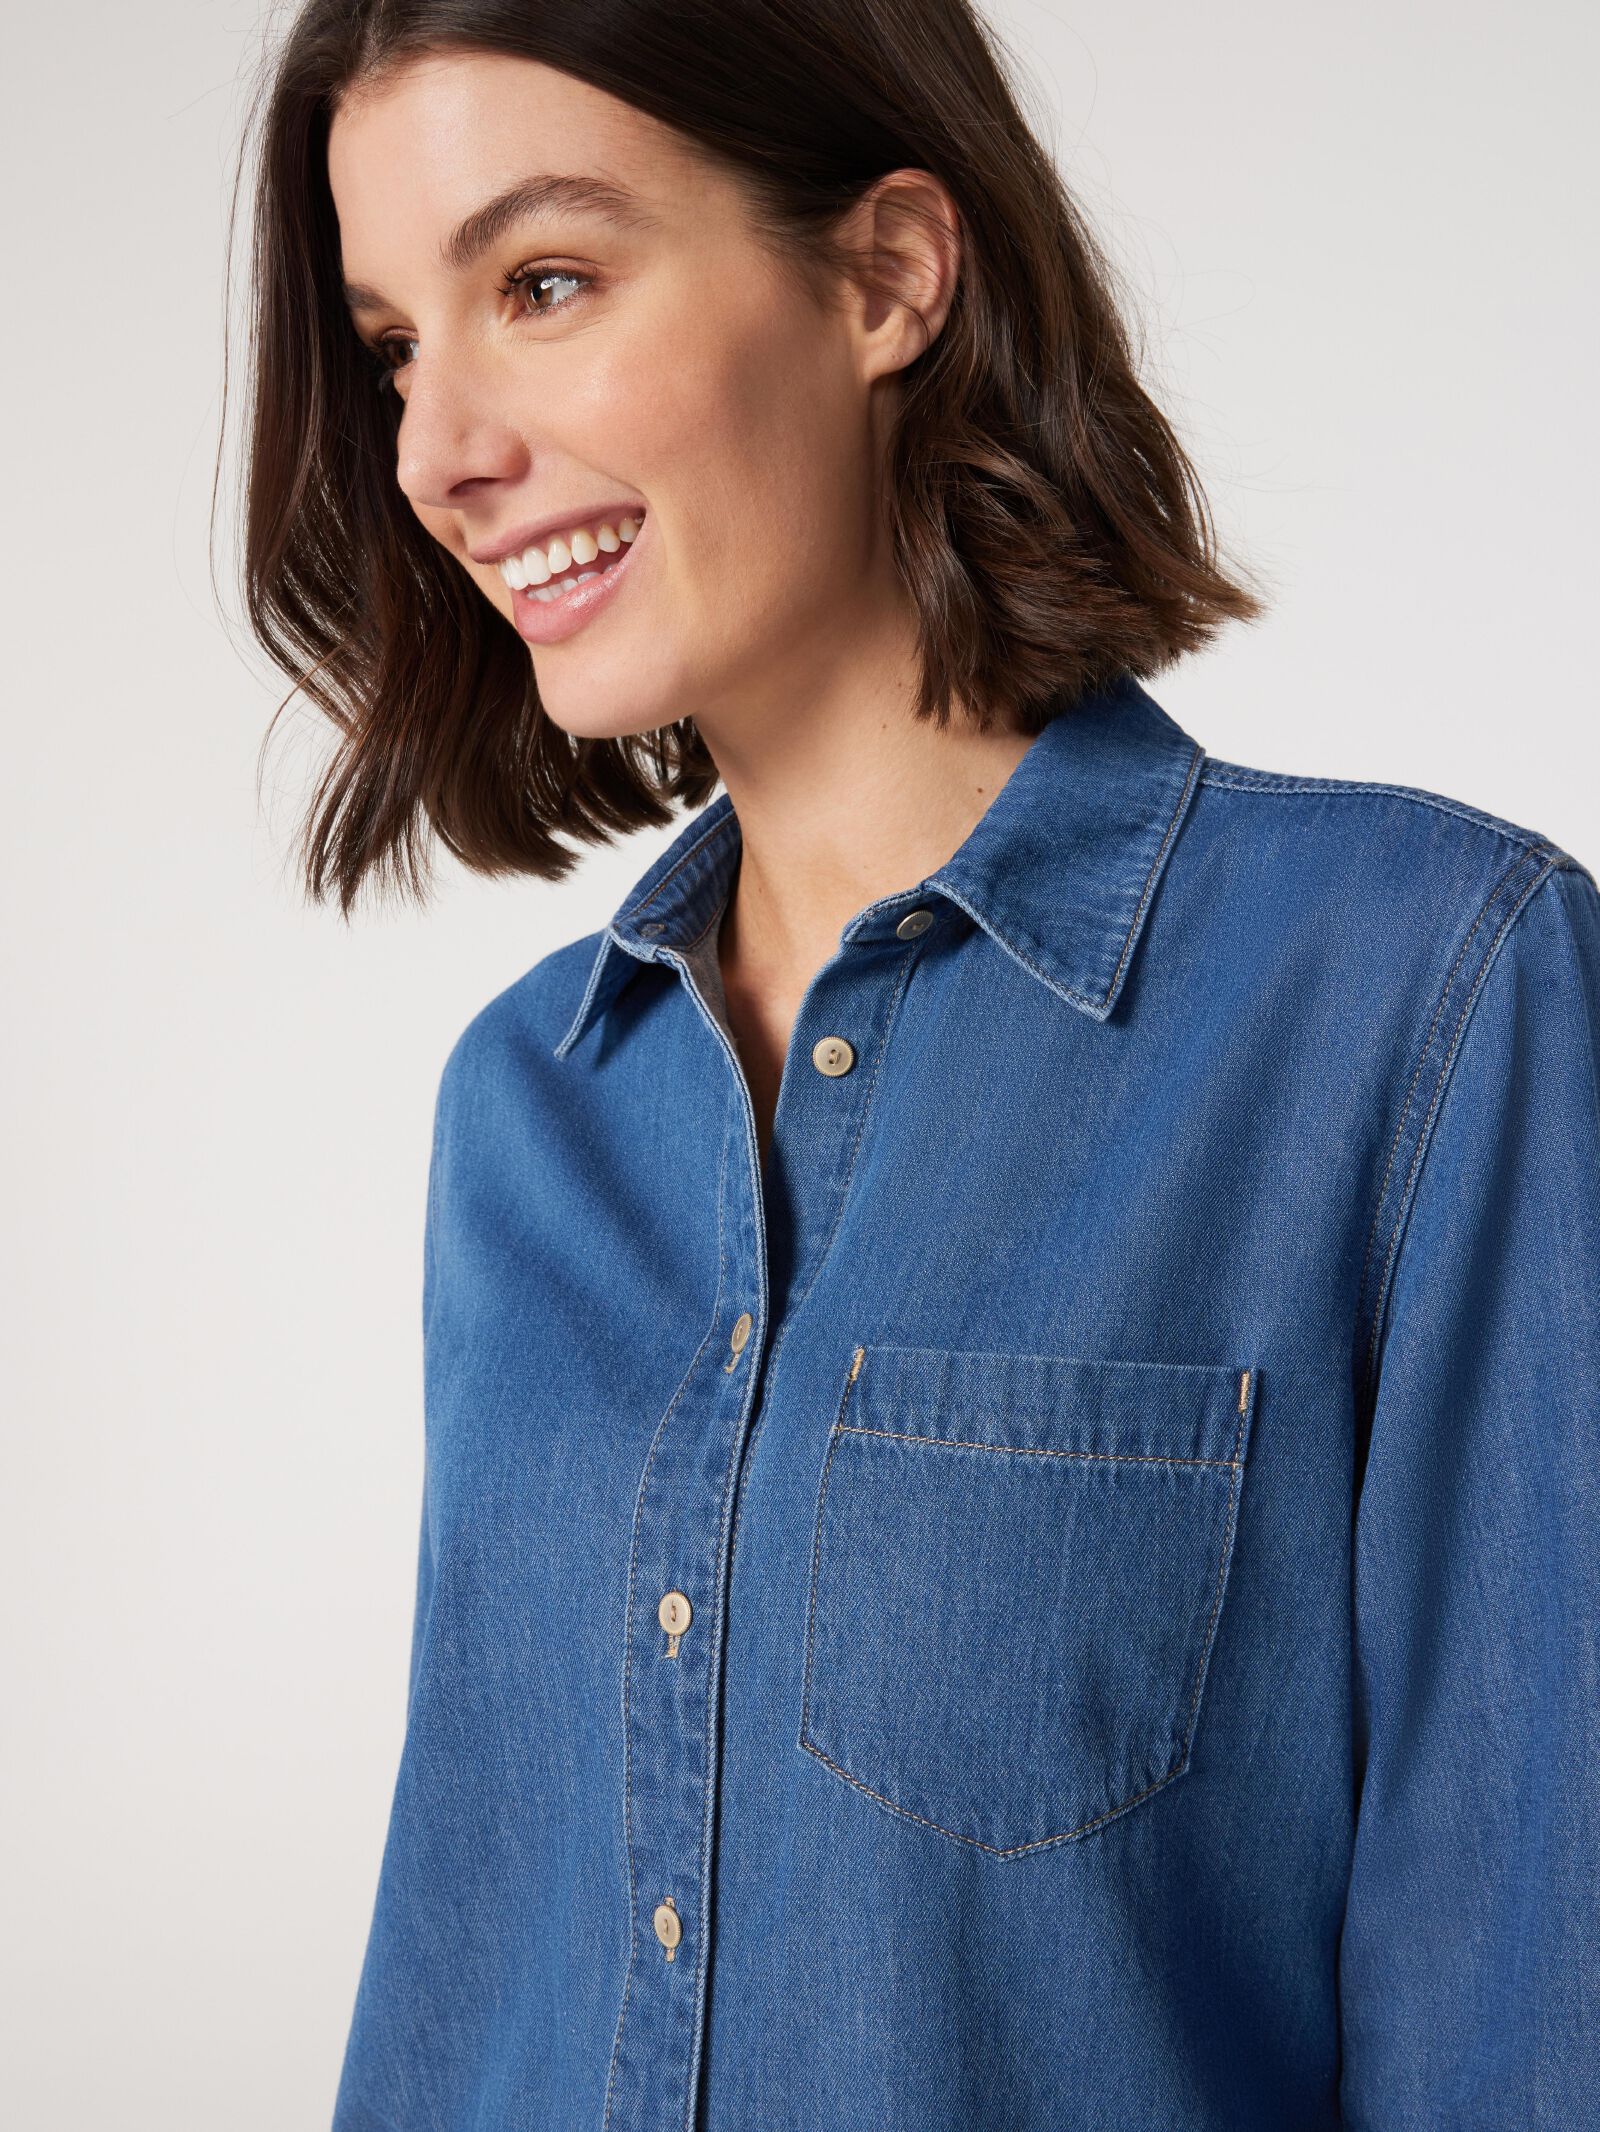 Fashionable Young Woman in a Vintage Denim Shirt with Black Stock Image -  Image of girl, model: 124788093